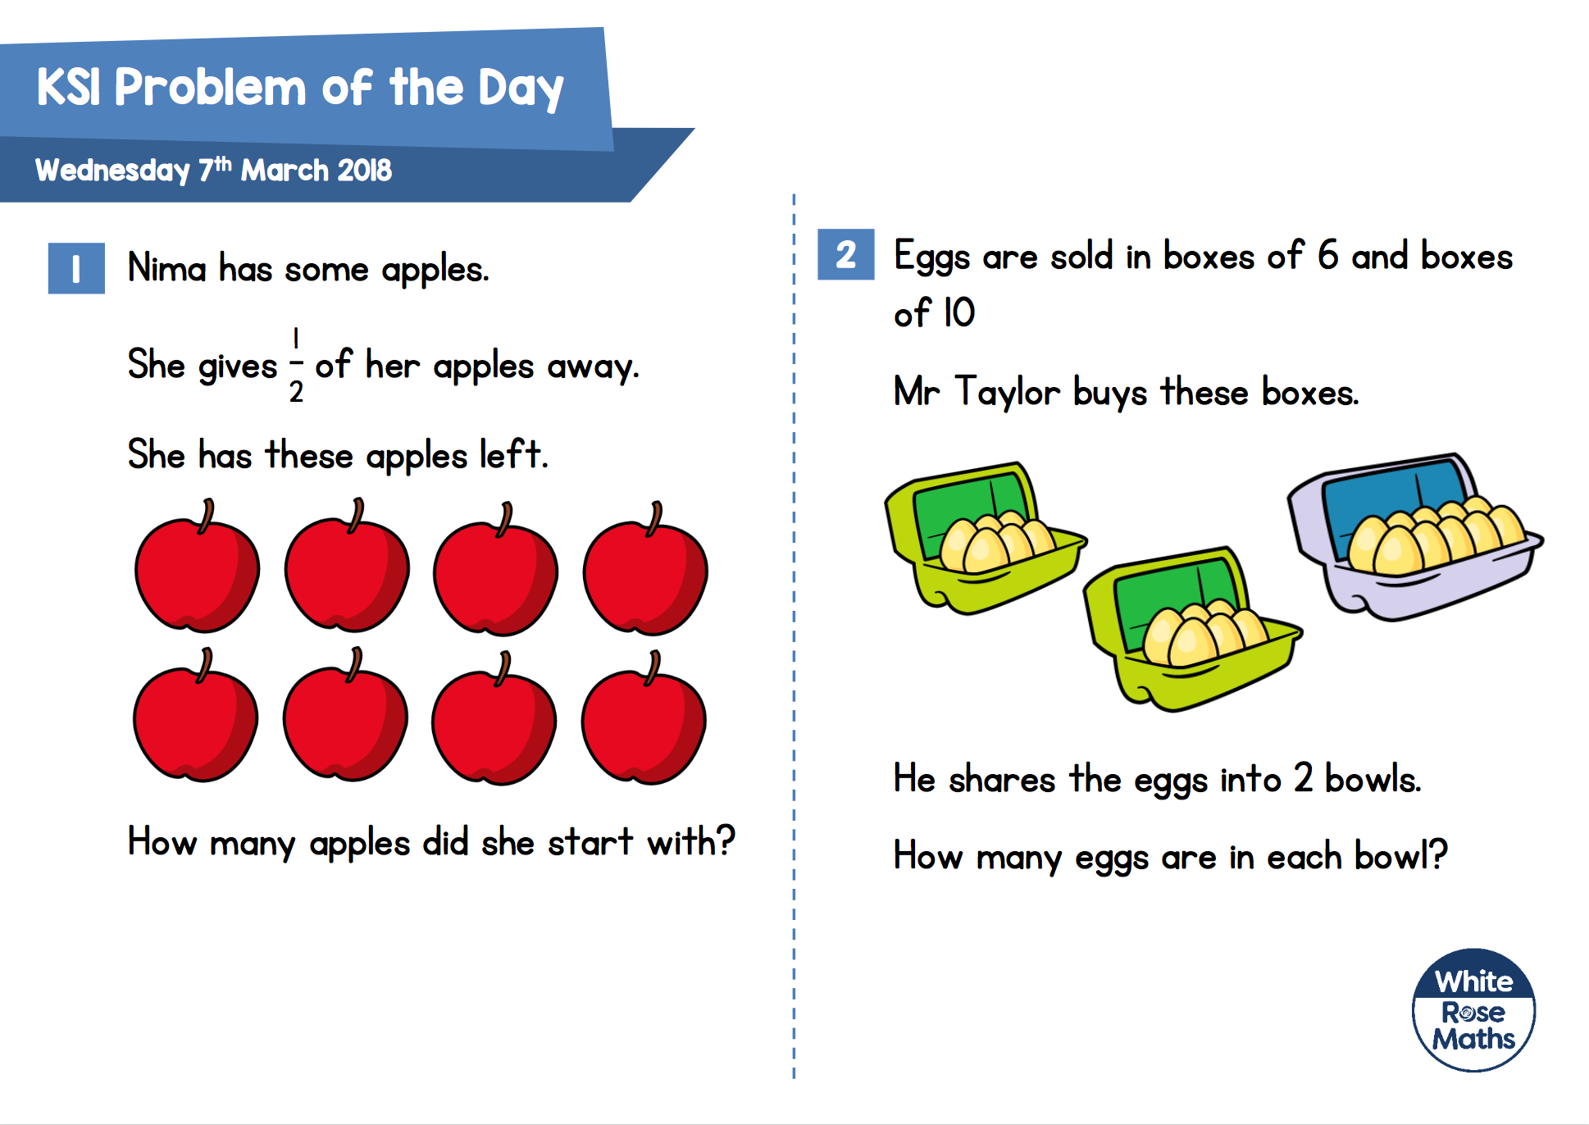 Maths Problems Of The Day 7 3 18 Tranmere Park Primary School